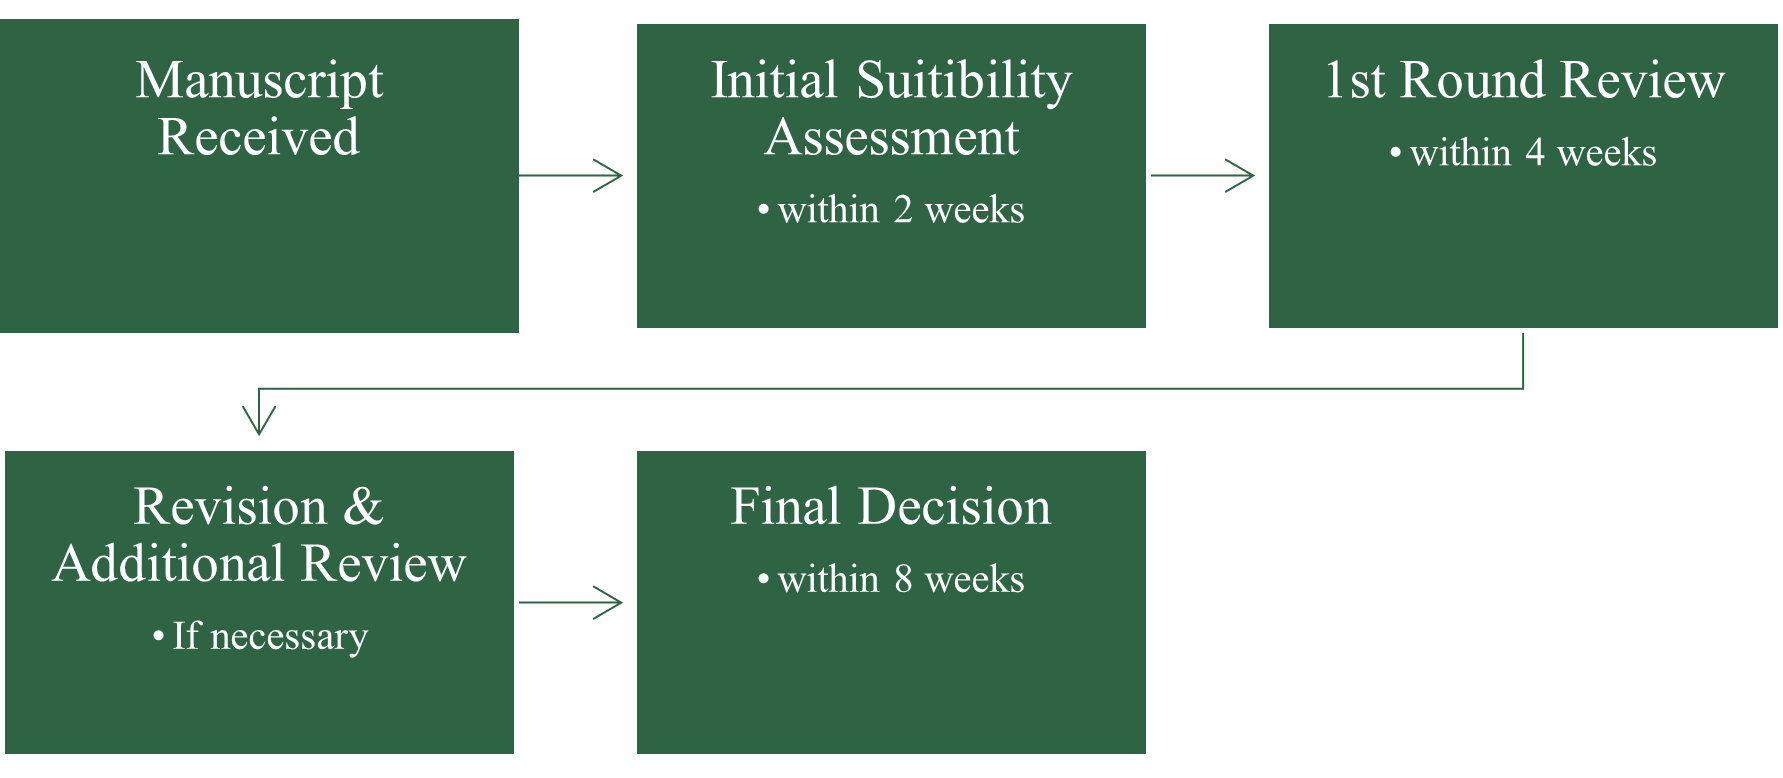 HNMR Review Process